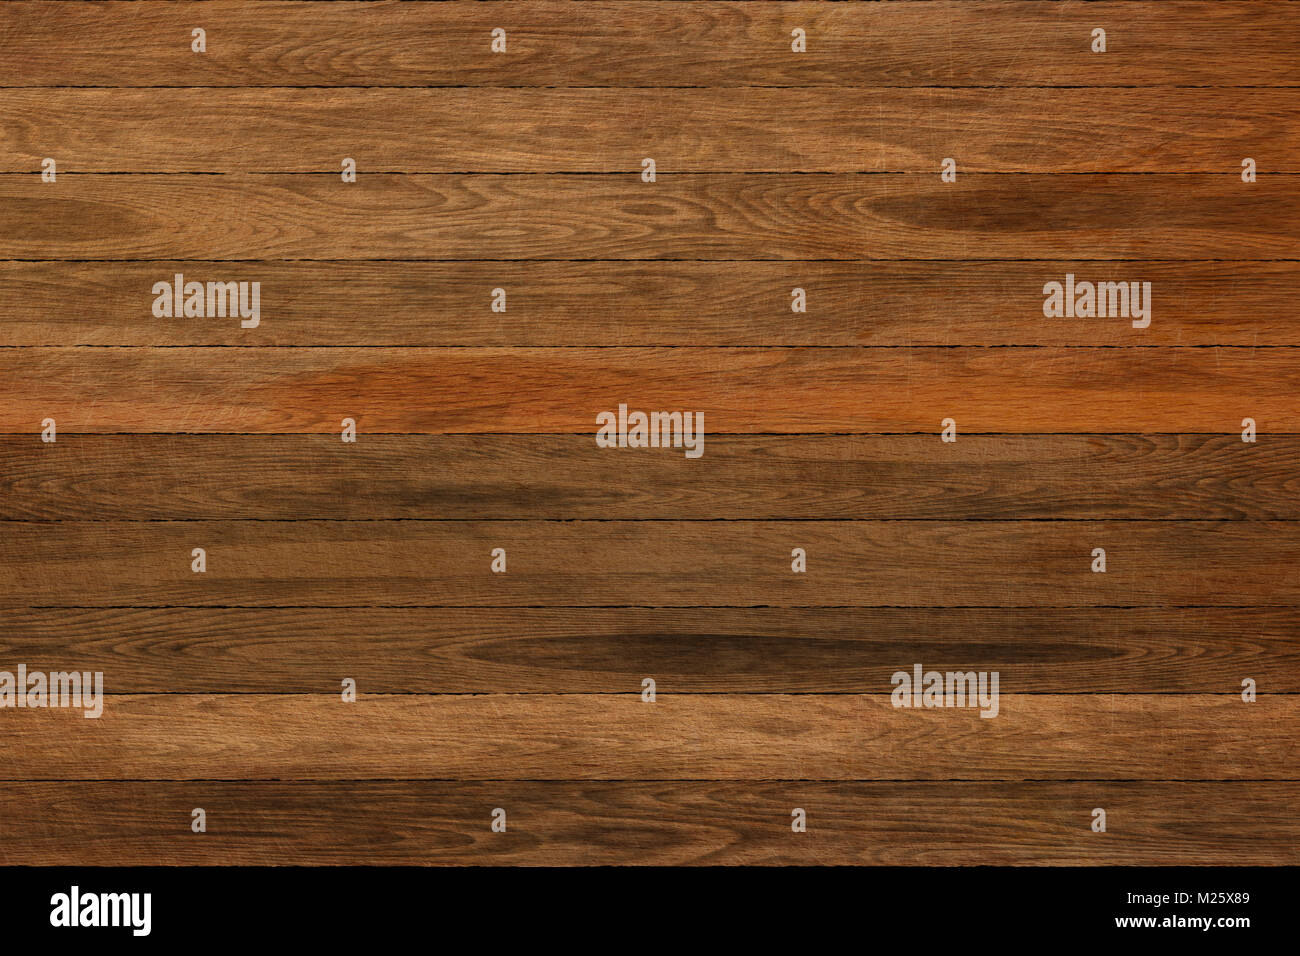 Grunge wood panels. Planks Background. old wall wooden floor vintage Stock Photo